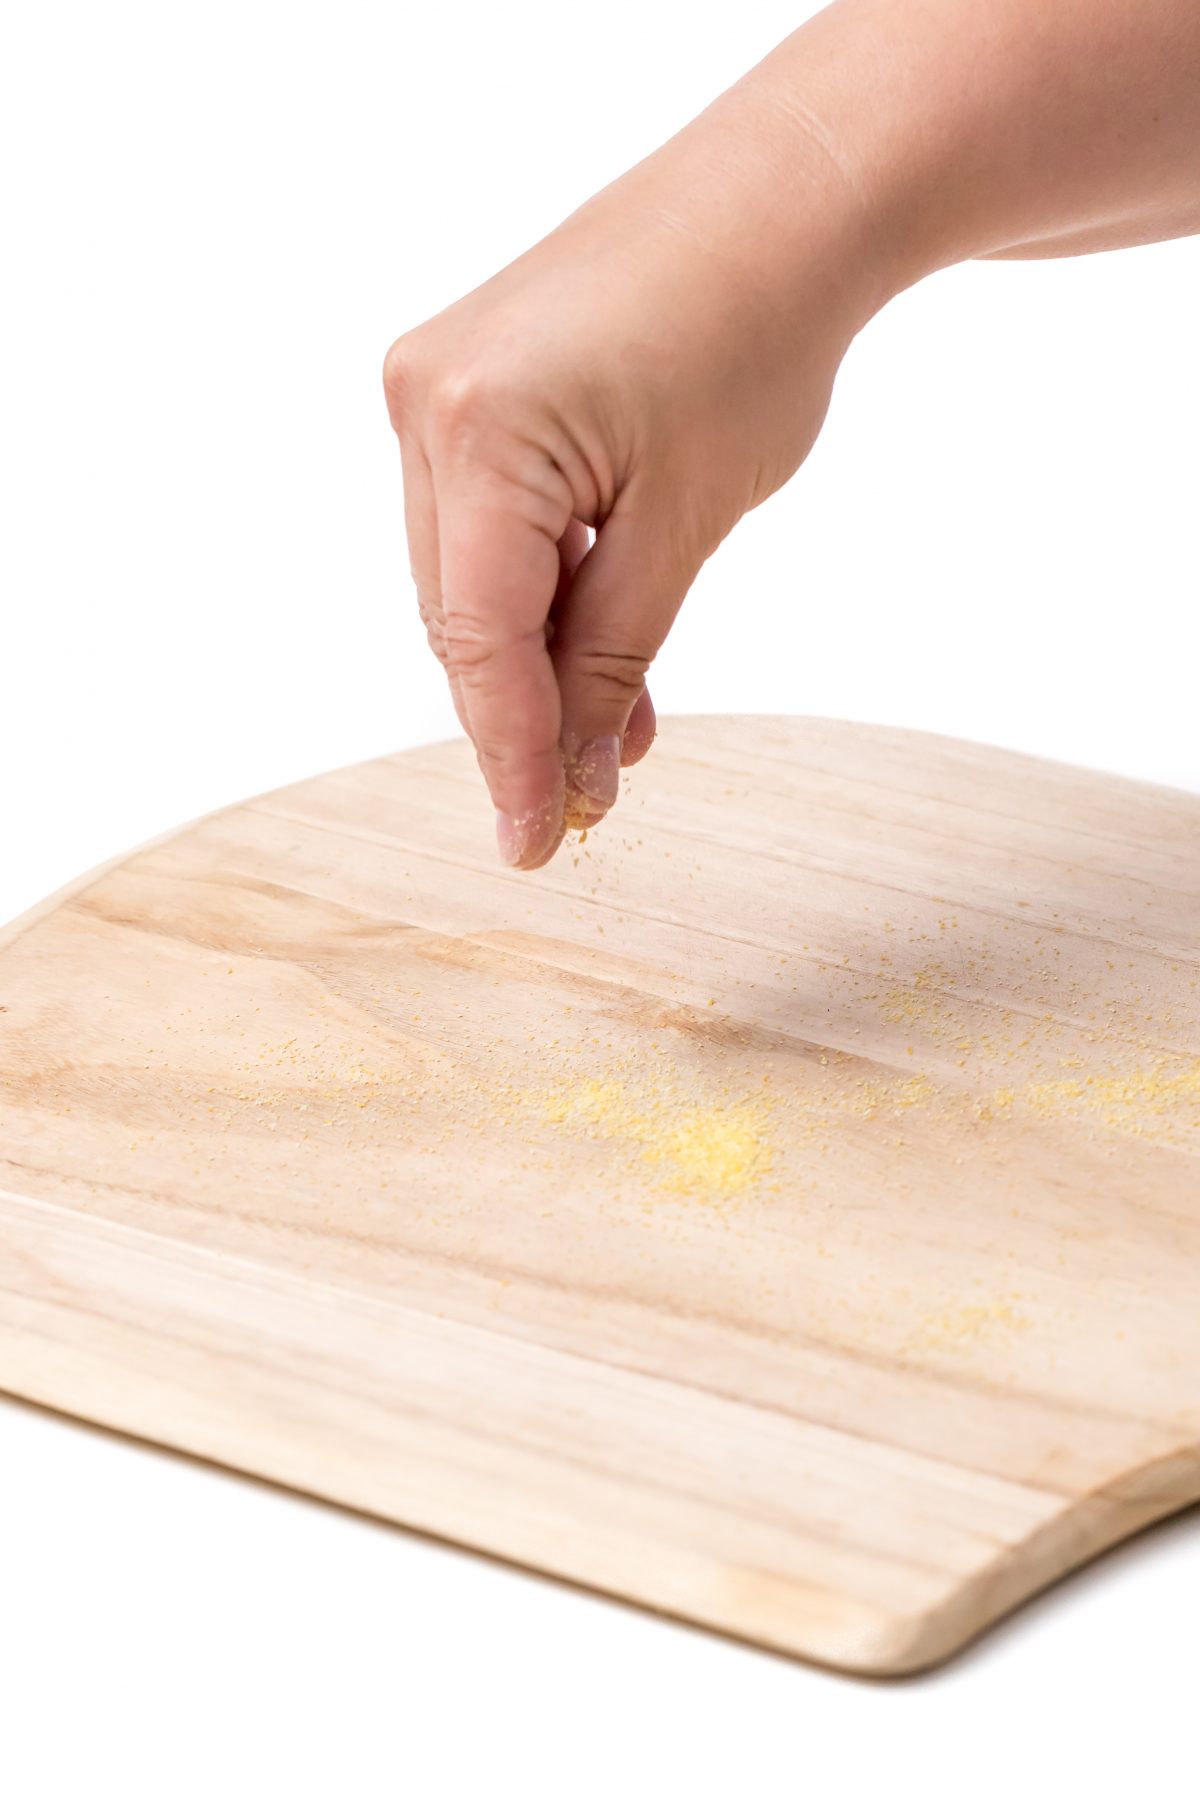 Sprinkle cornmeal on pizza peel to prevent sticking